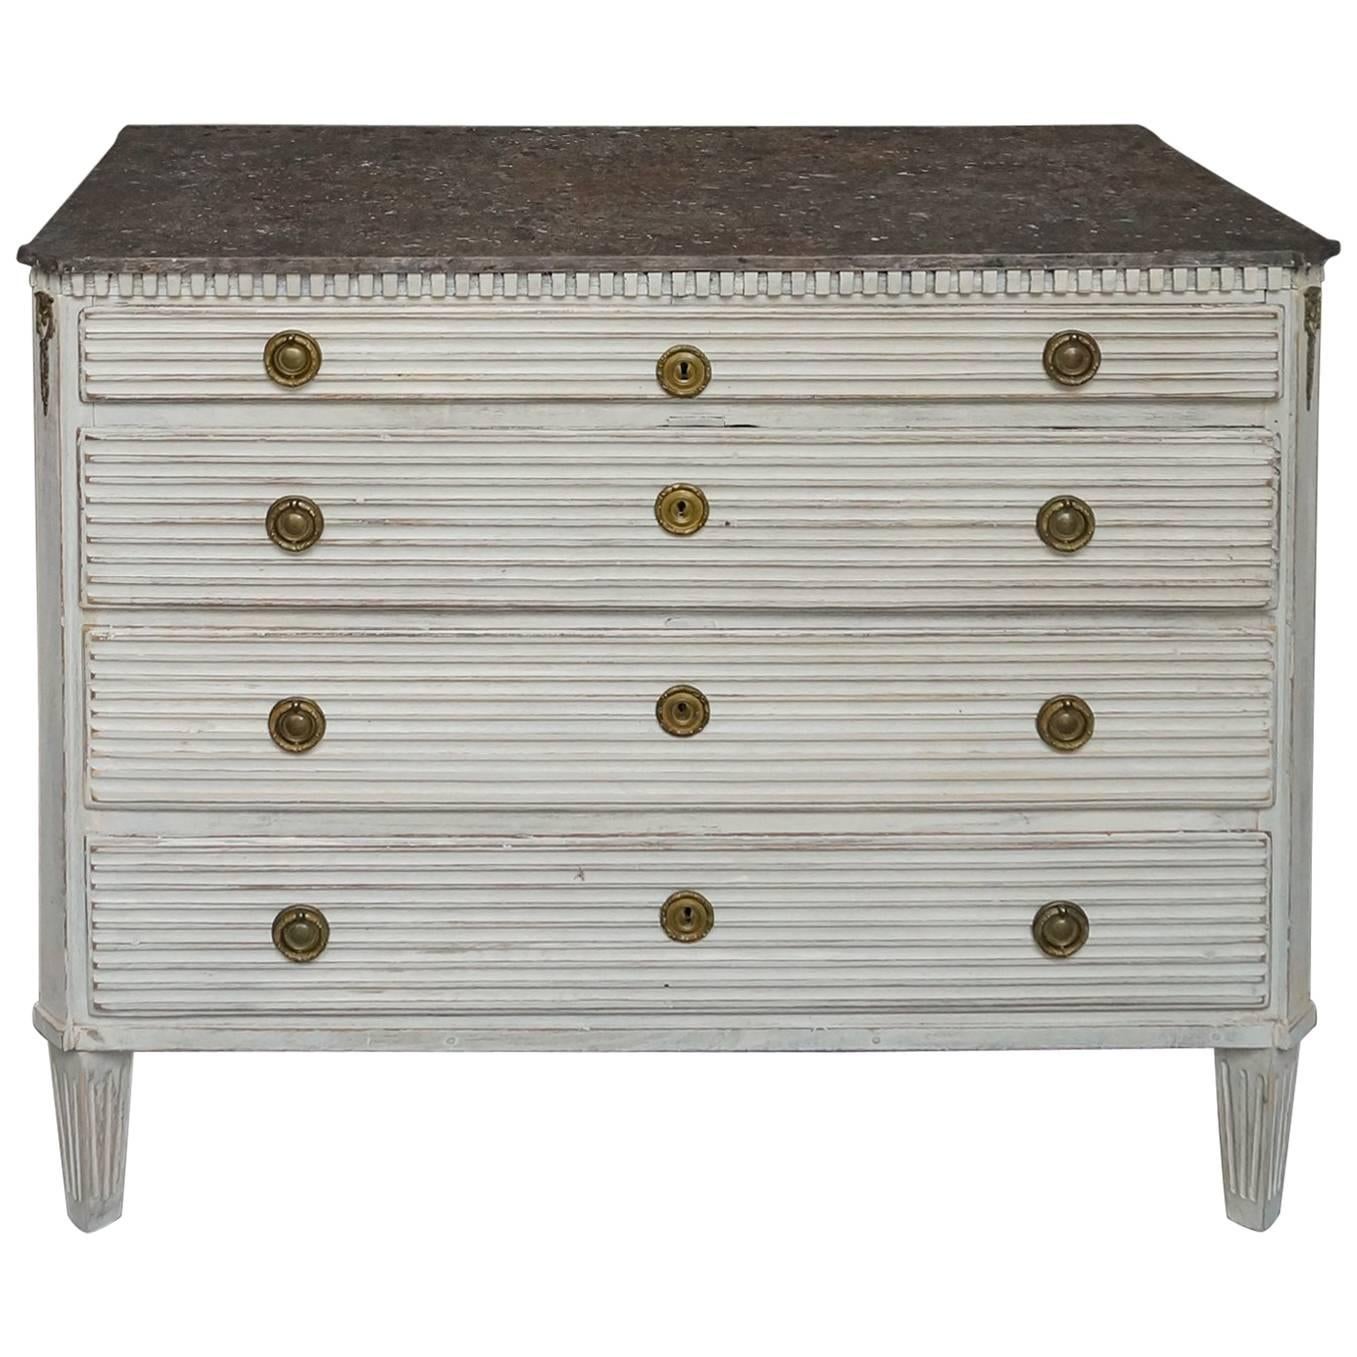 Period Gustavian Chest of Drawers